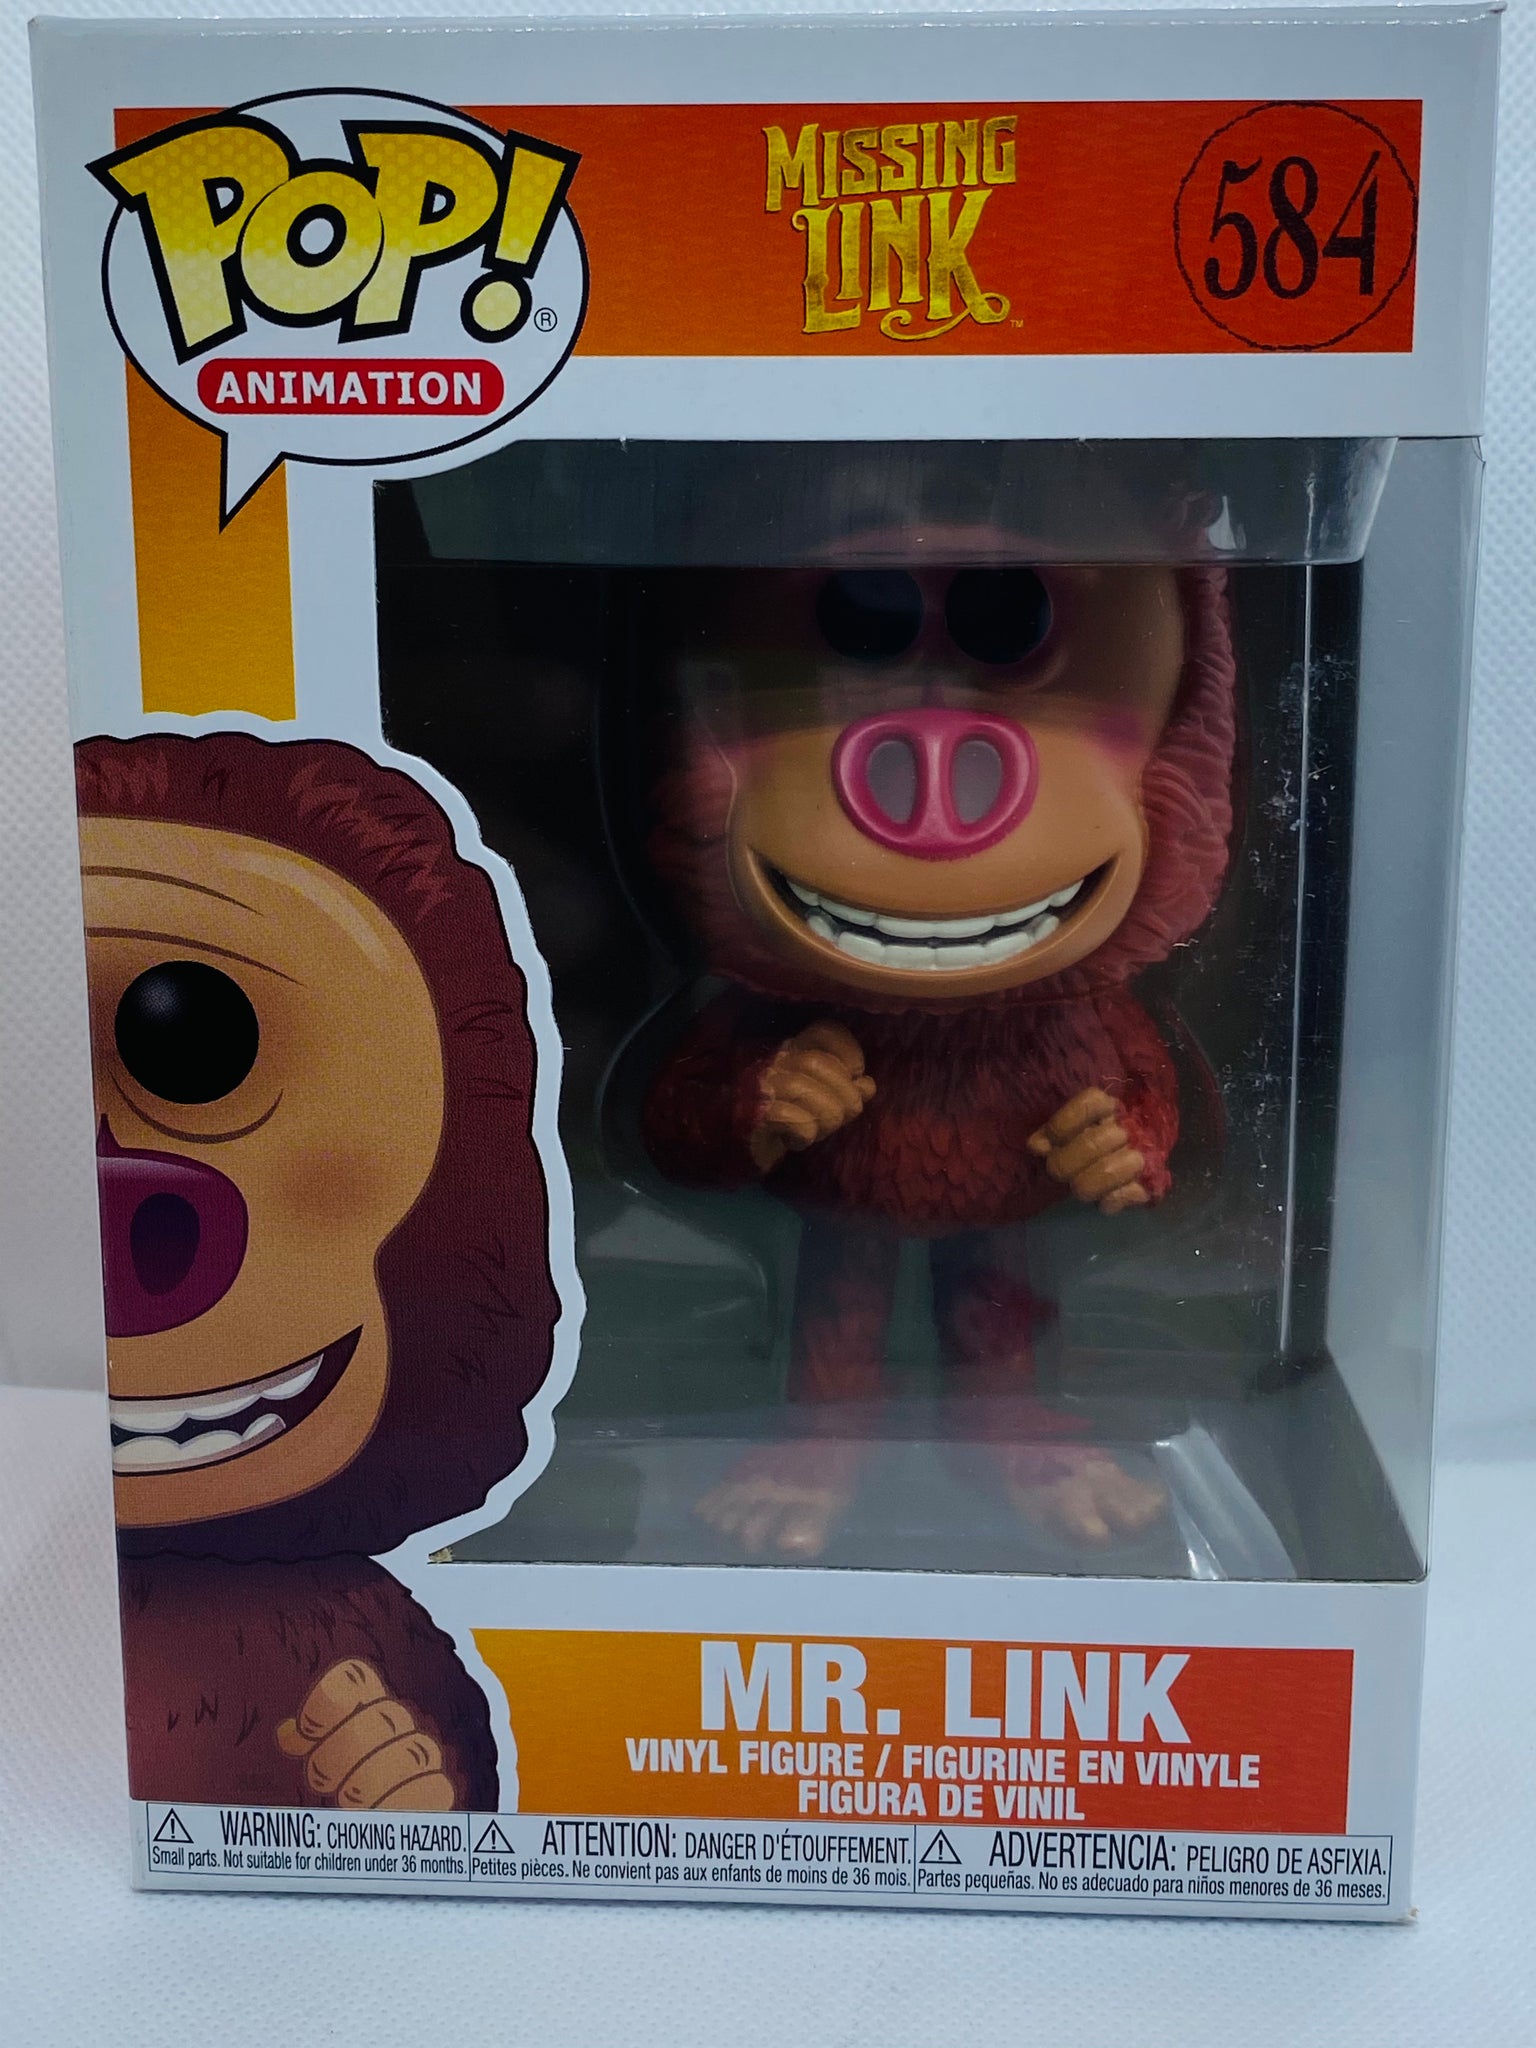 Link in Image Caption] Funko Pop! Television: Land Of The Lost